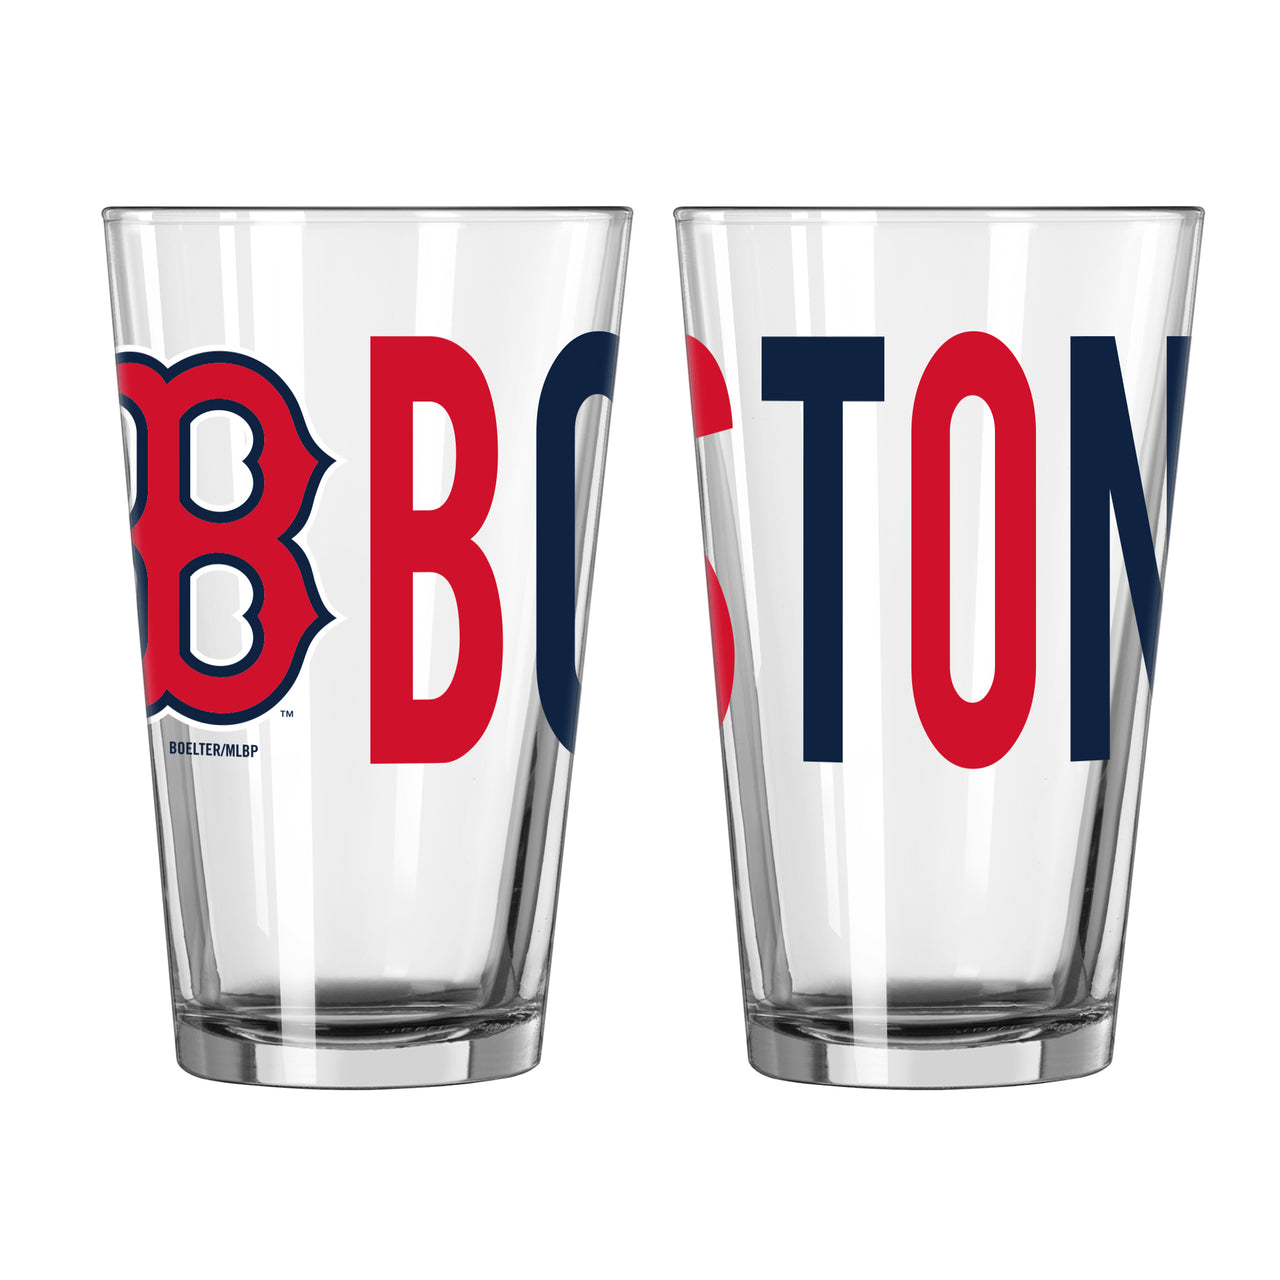 Boston Red Sox Overtime Pint Glass - Dynasty Sports & Framing 